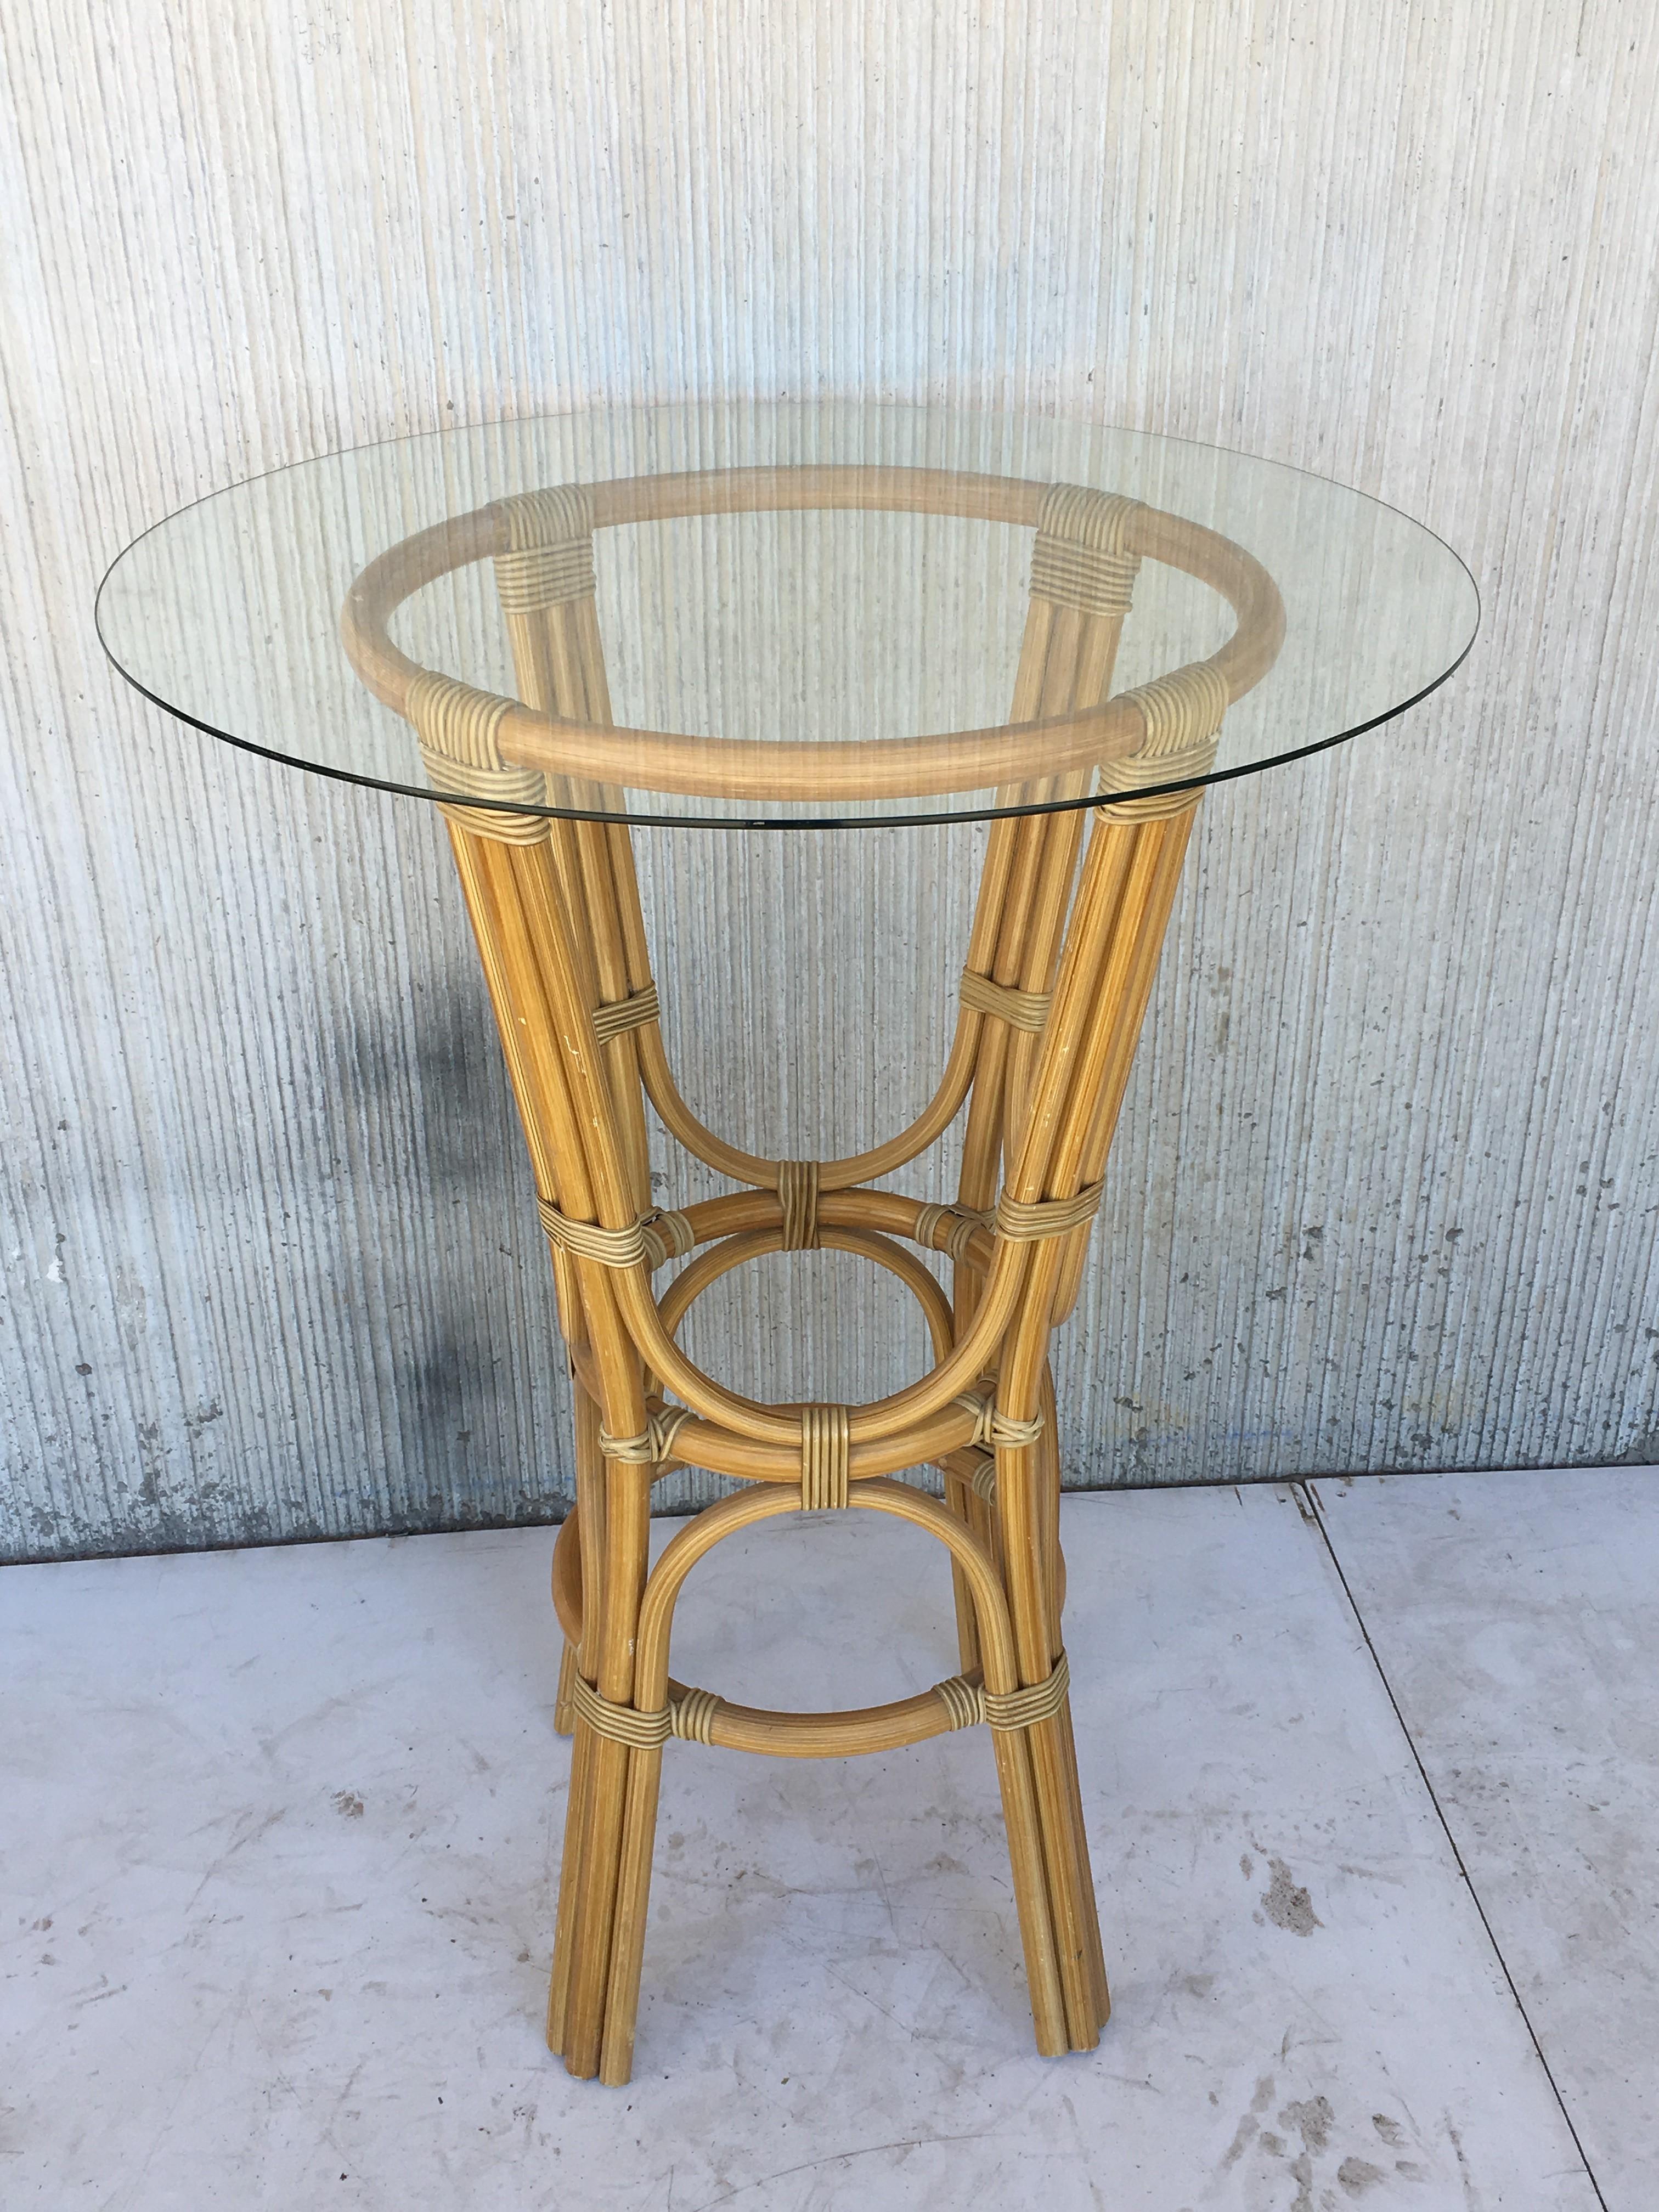 20th century set of four high round cocktail table in faux bamboo with glass top

Measurements of glass top: 35.75in diameter.